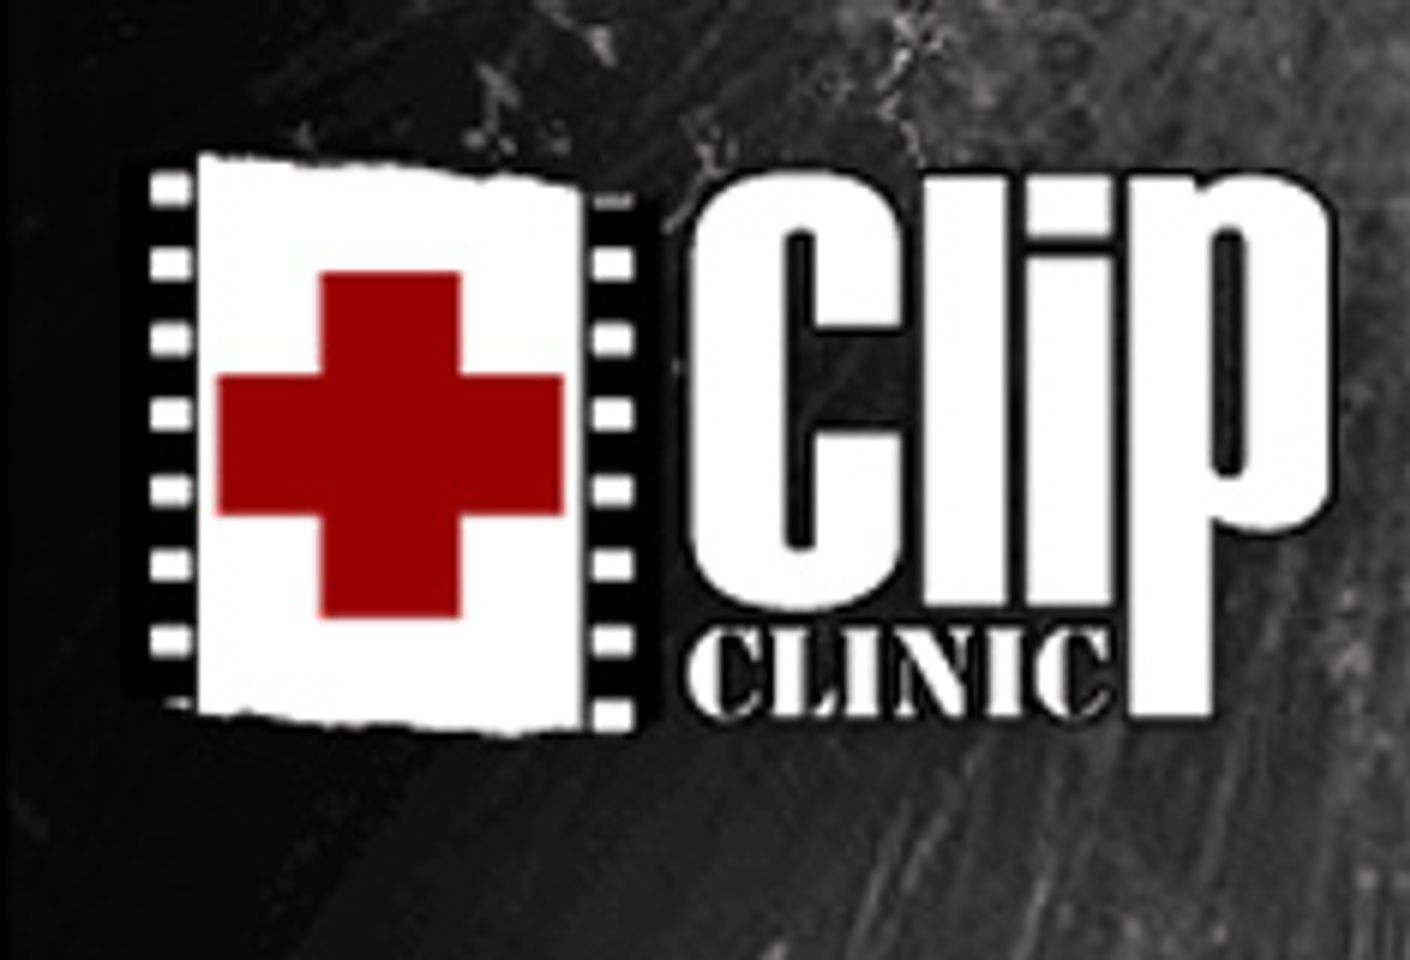 ClipClinic Launches Site Redesign